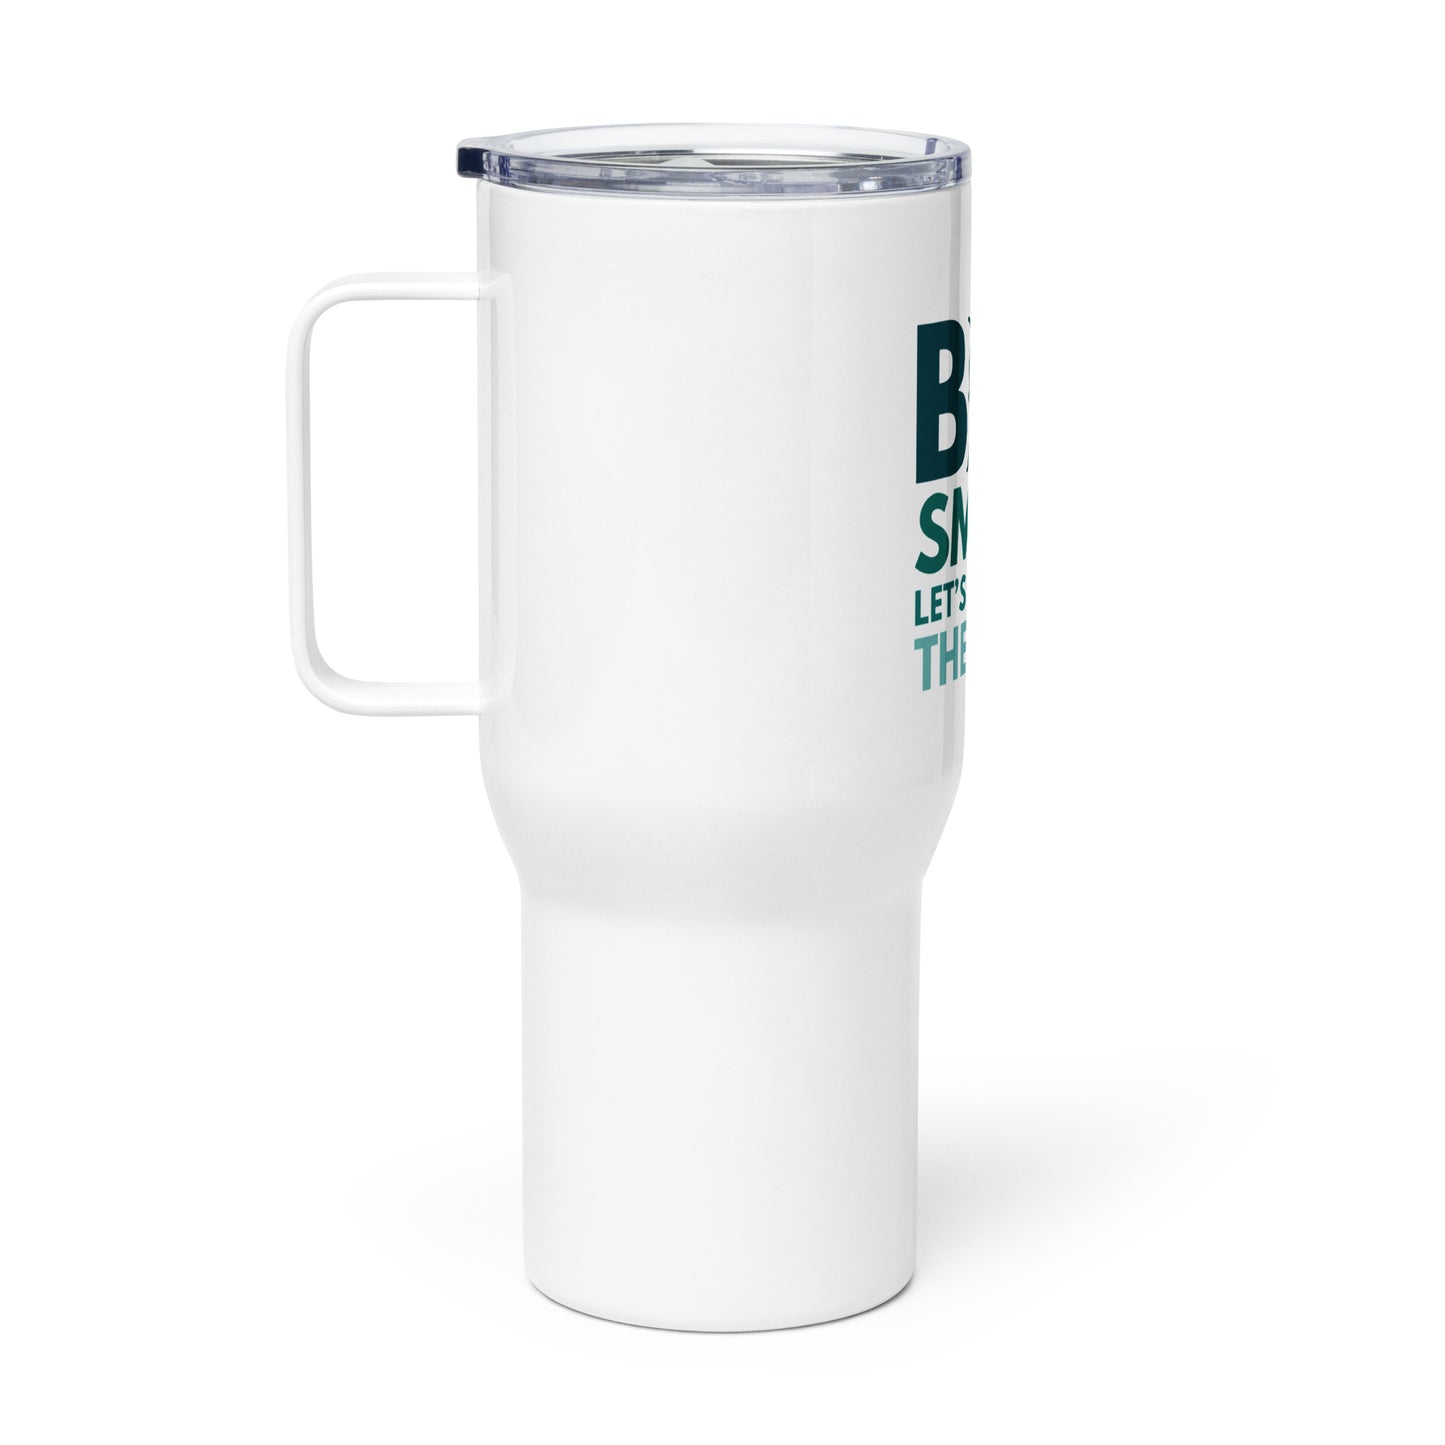 Big or Small, Let's Protect Them All - Travel mug with handle (25 oz)